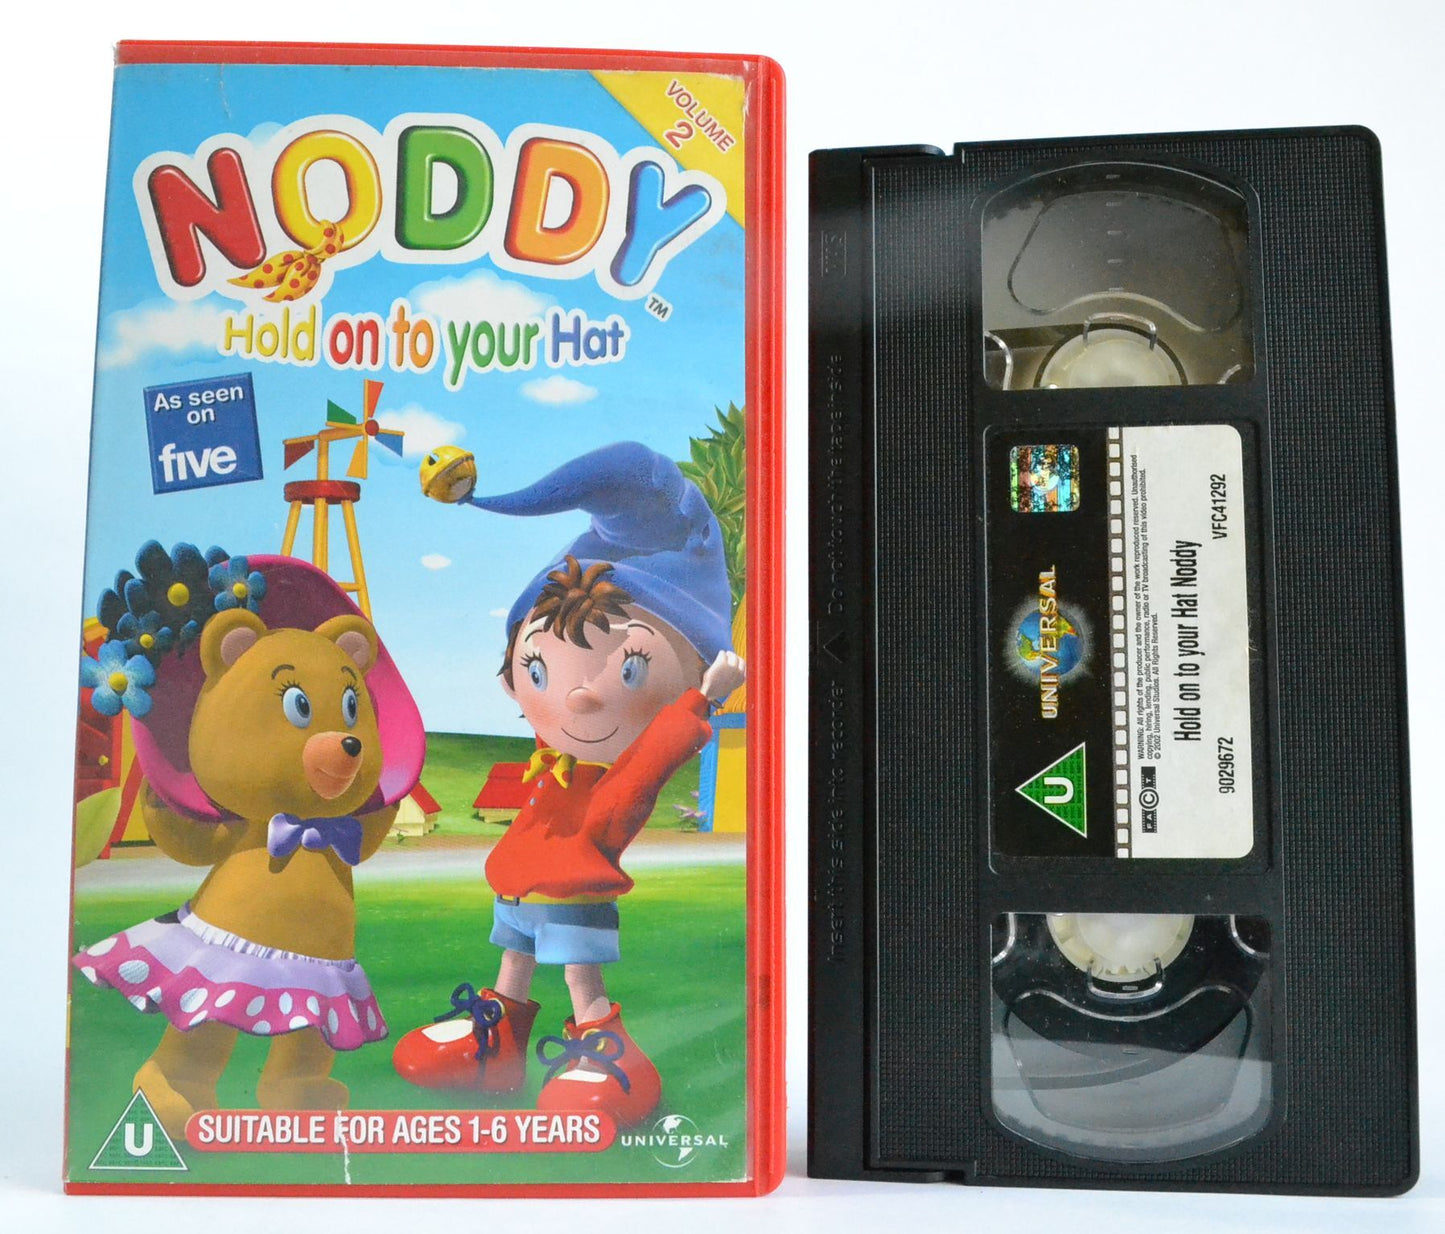 Noddy (Vol. 2): Hold On To Your Hat - Children's 1-6 Years Old - Education - VHS-